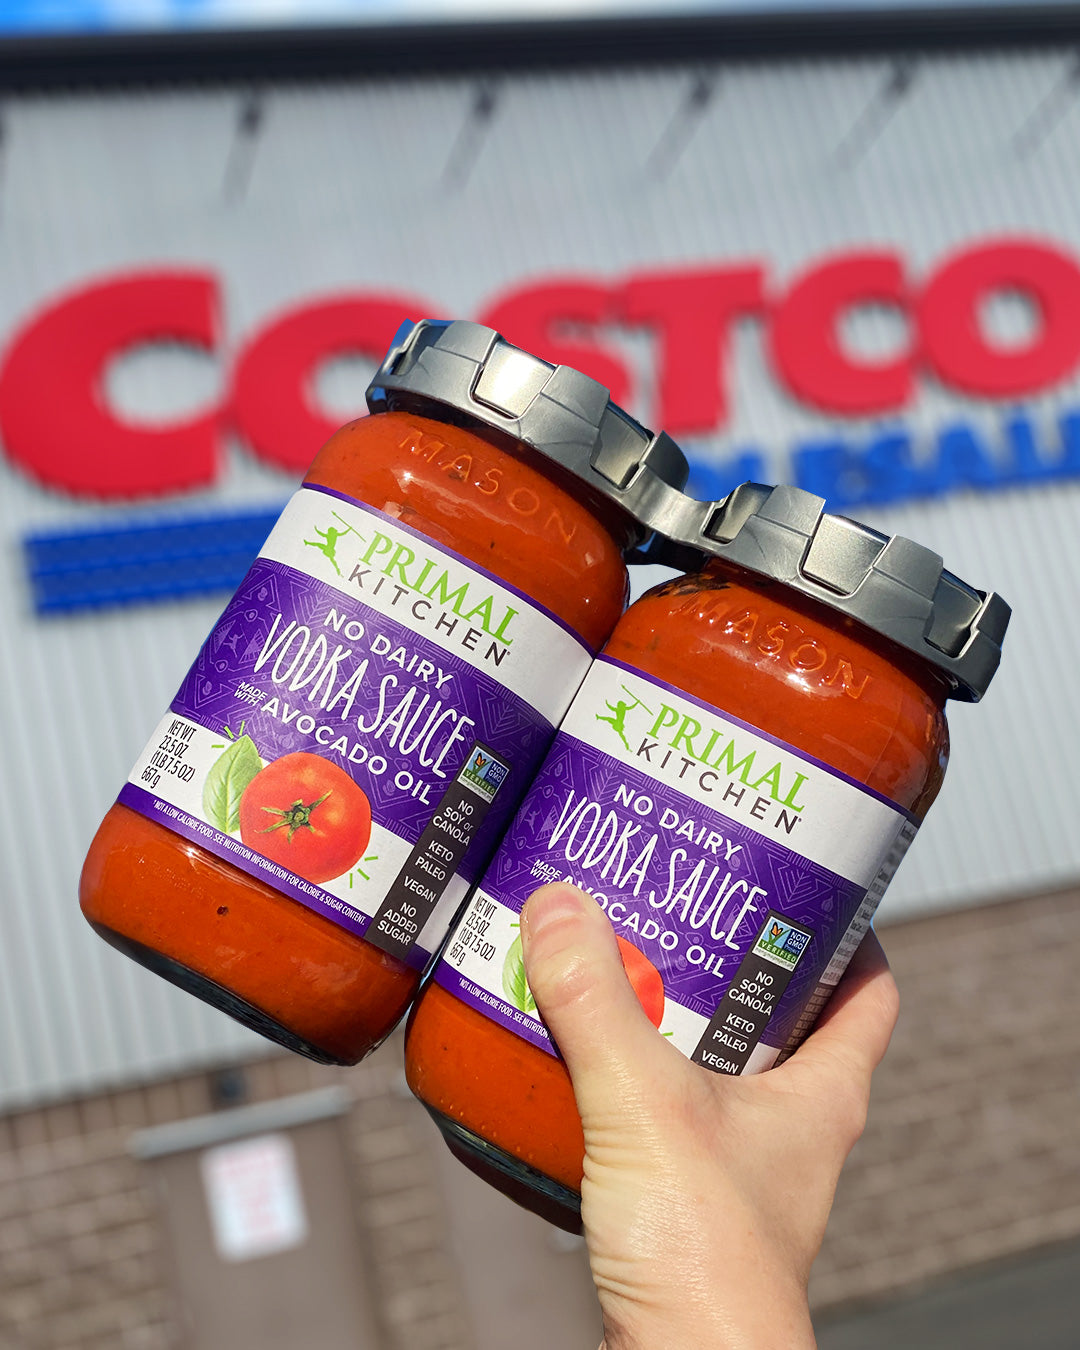 Vodka Sauce Costco Sweepstakes Official Rules